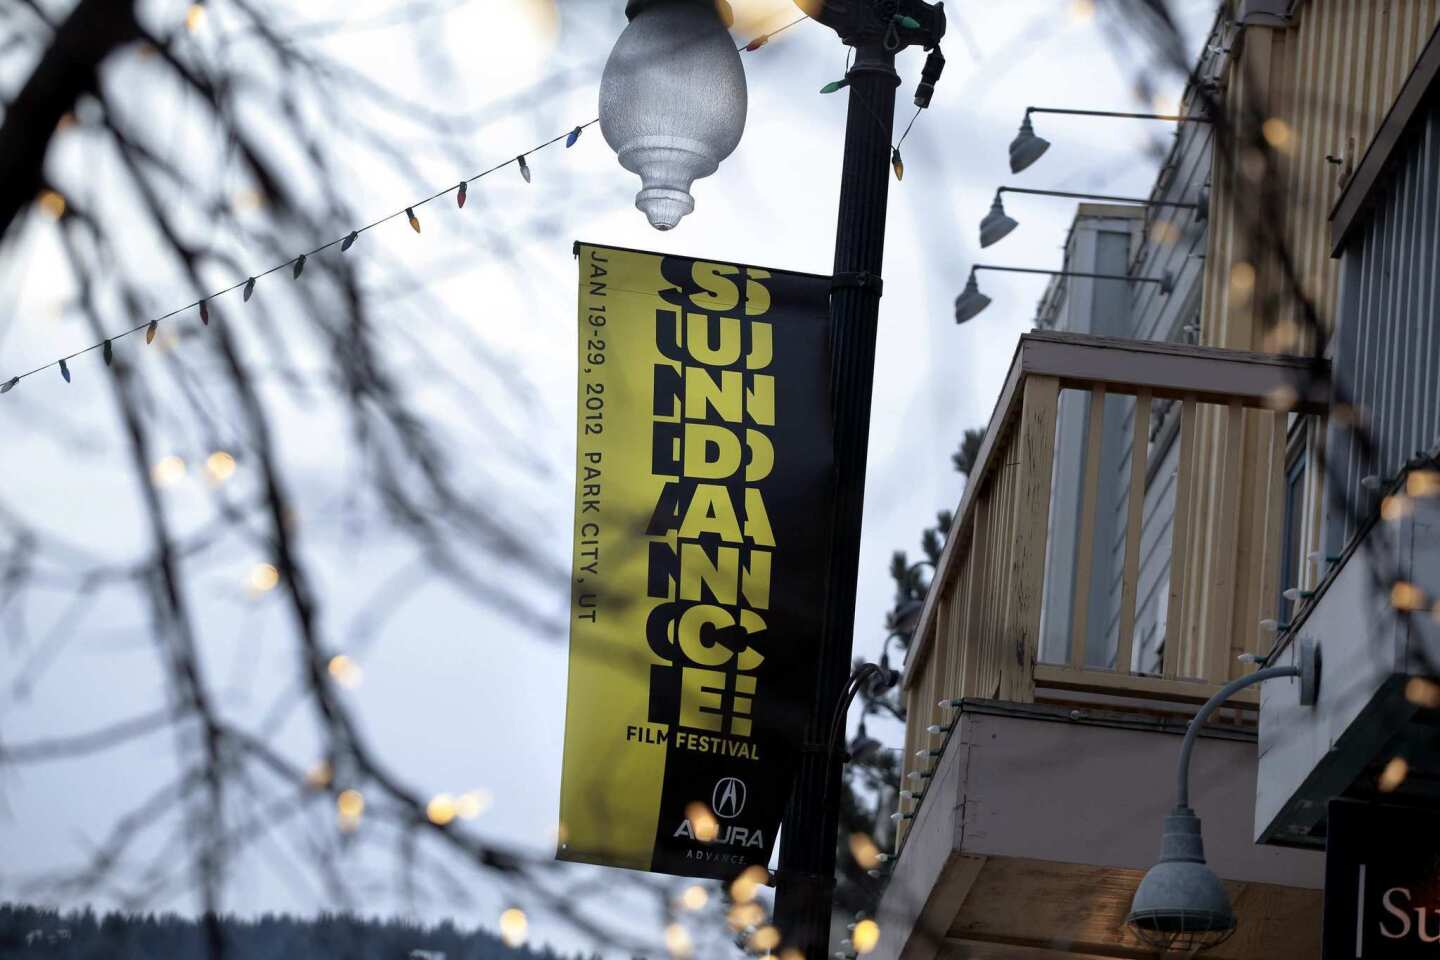 A sign indicating the annual film festival.